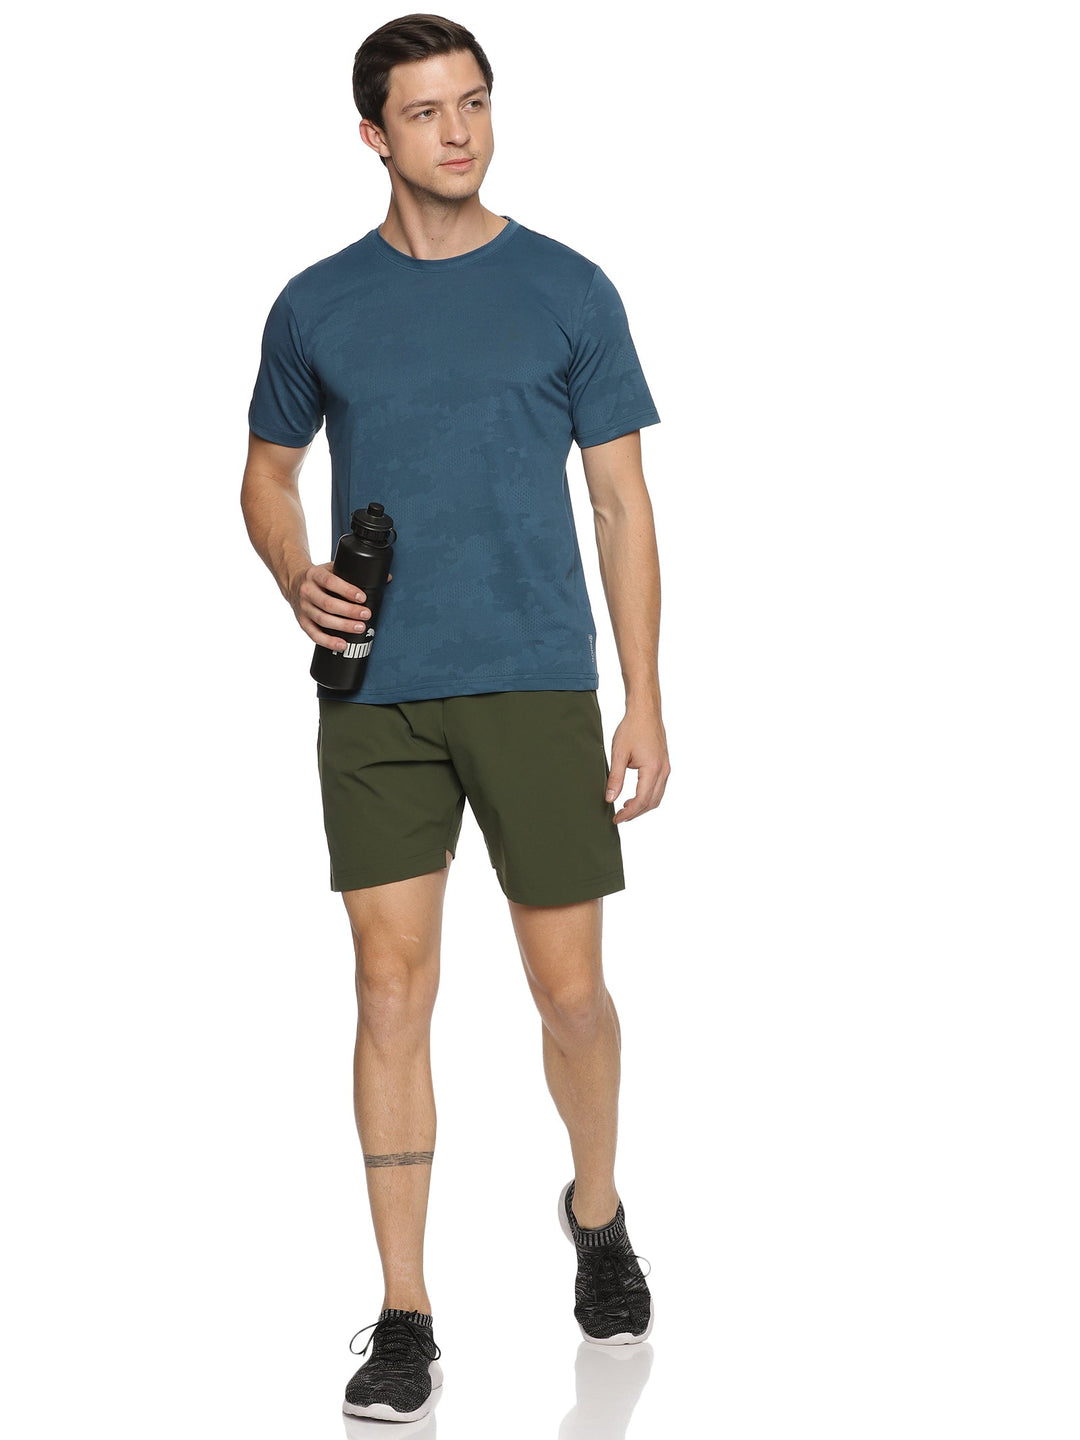 Men's Solid Training Shorts with Elasticated Drawstring (Olive)